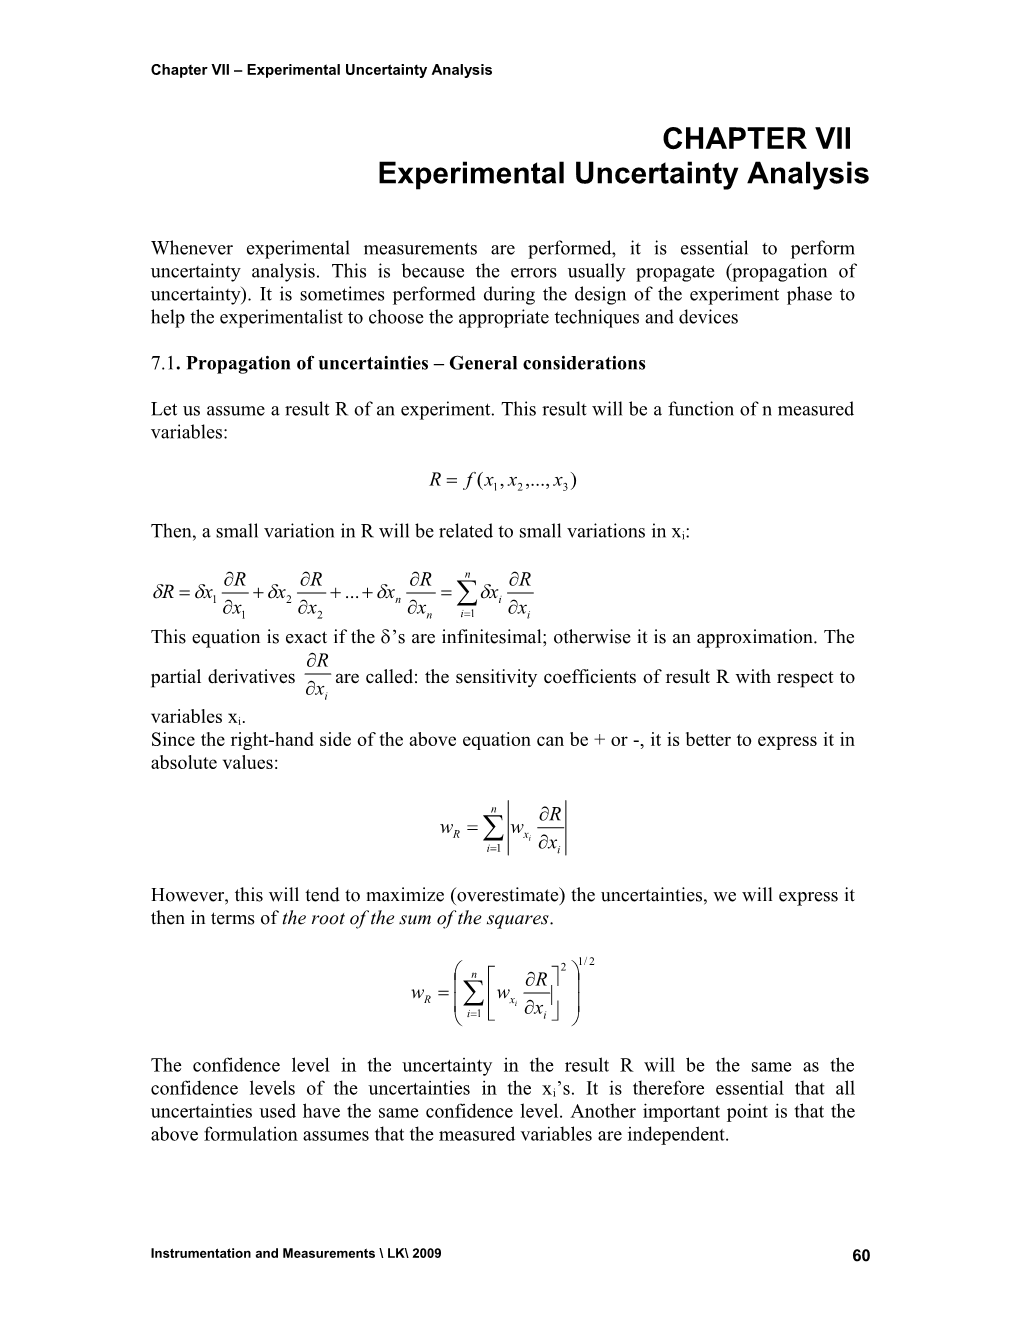 Chapter VII Experimental Uncertainty Analysis